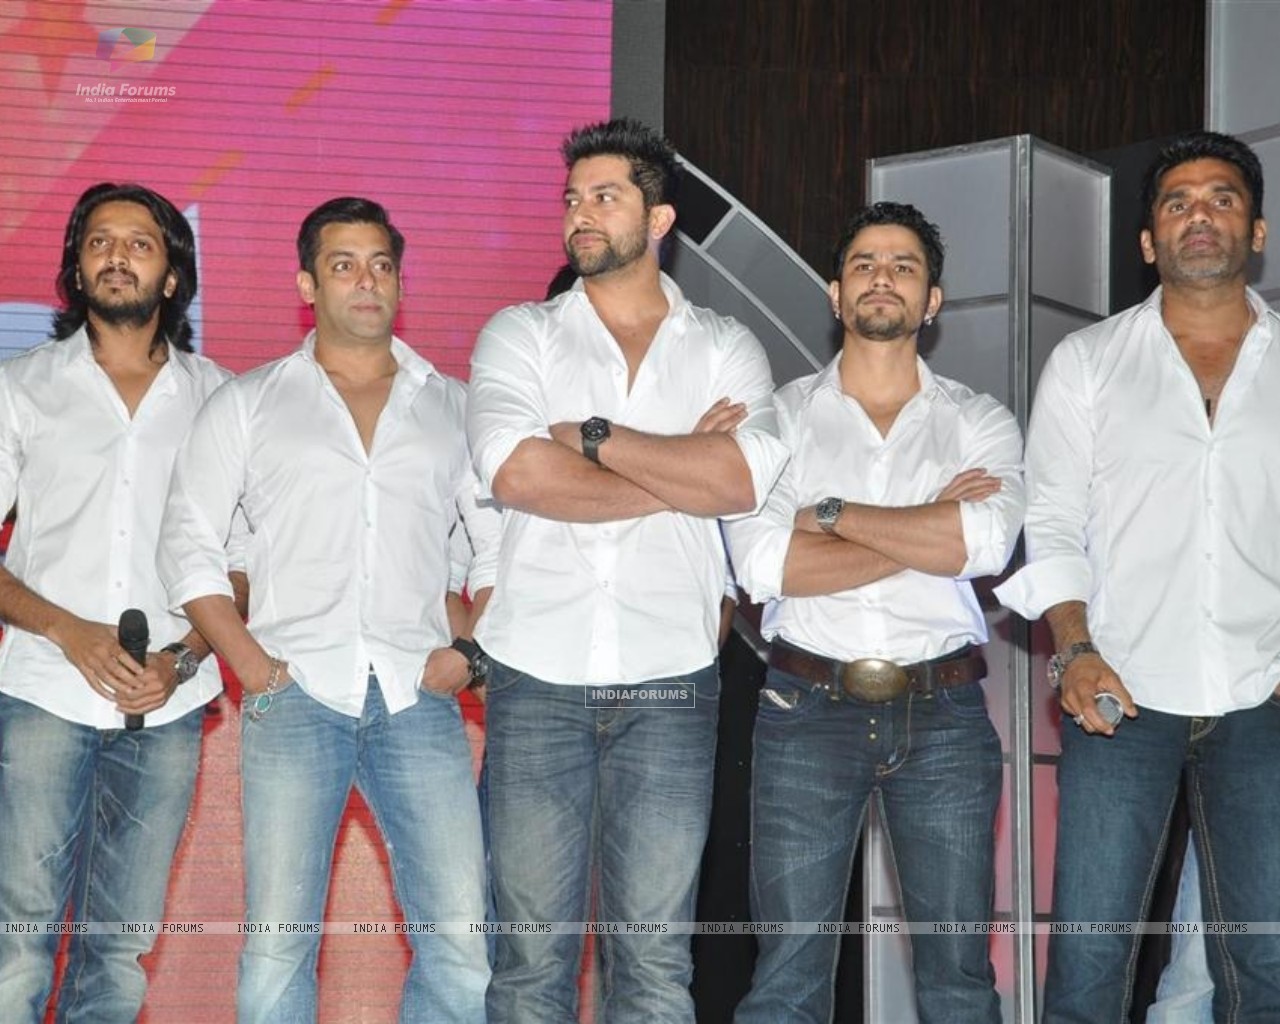 http://img.india-forums.com/wallpapers/1280x1024/110074-bollywood-actors-at-press-conference-for-the-celebrity-cricket.jpg